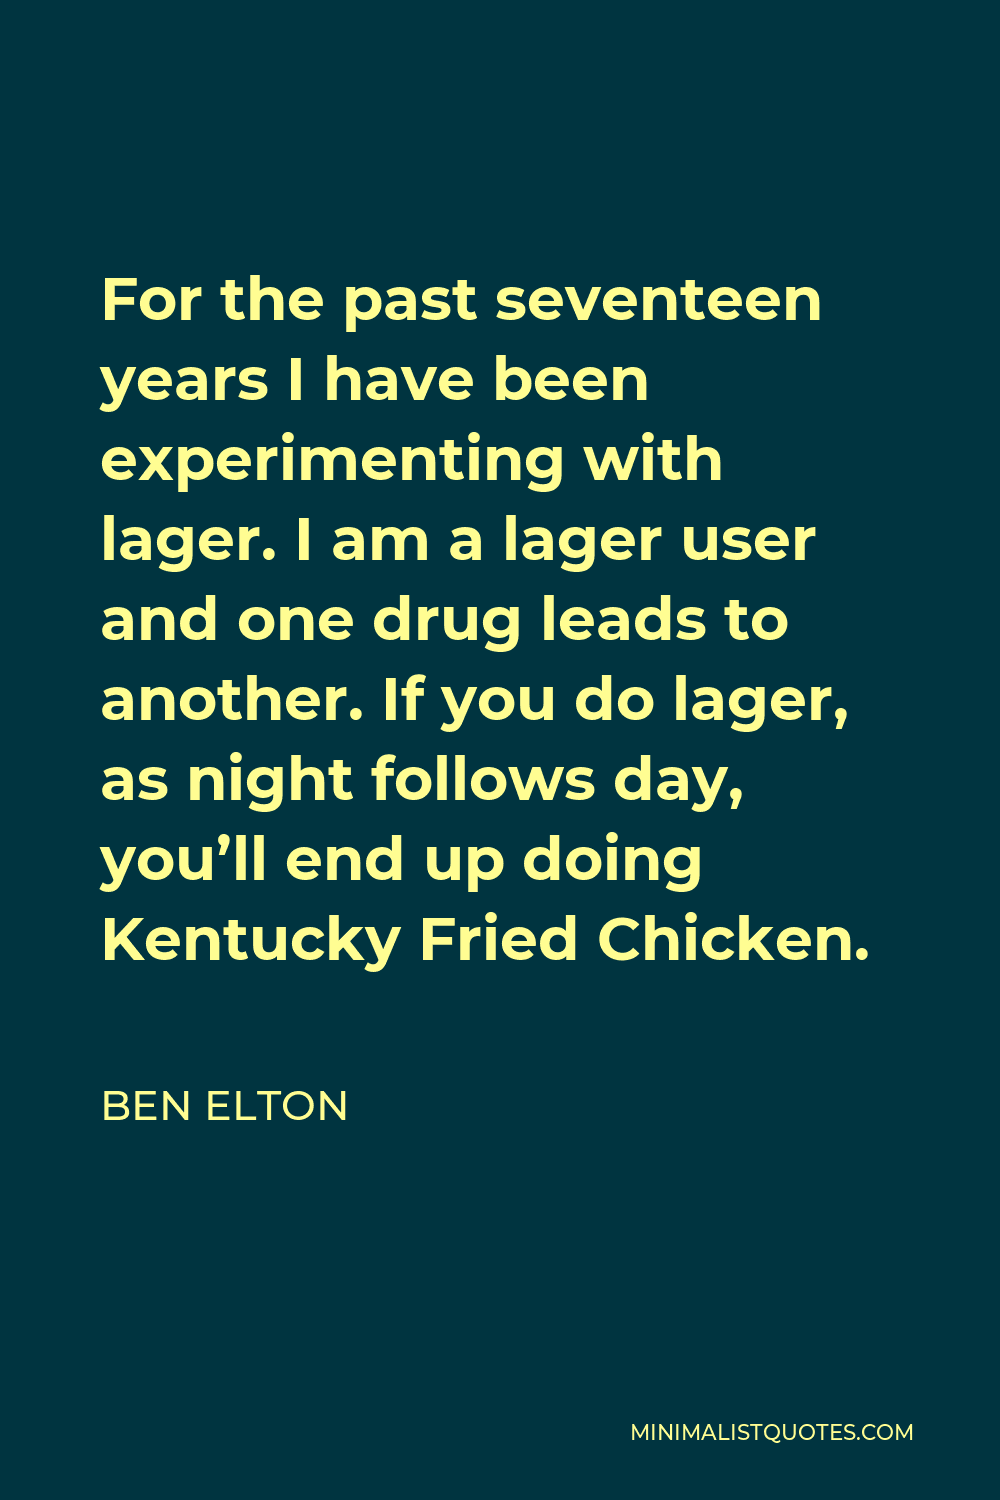 Ben Elton Quote - For the past seventeen years I have been experimenting with lager. I am a lager user and one drug leads to another. If you do lager, as night follows day, you’ll end up doing Kentucky Fried Chicken.